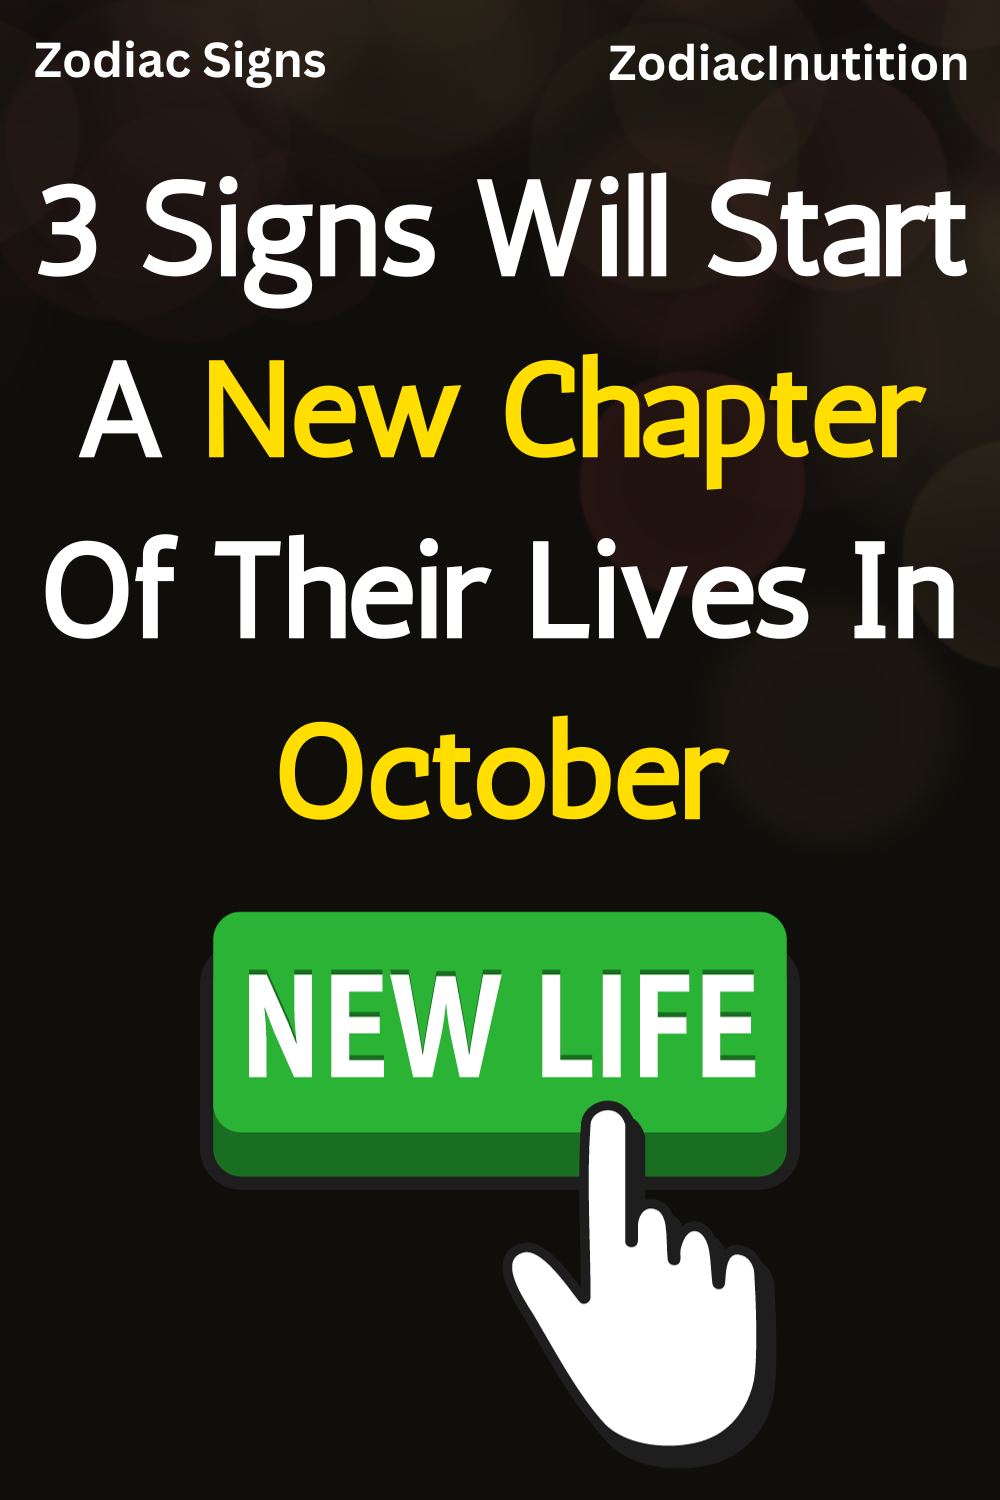 3 Signs Will Start A New Chapter Of Their Lives In October